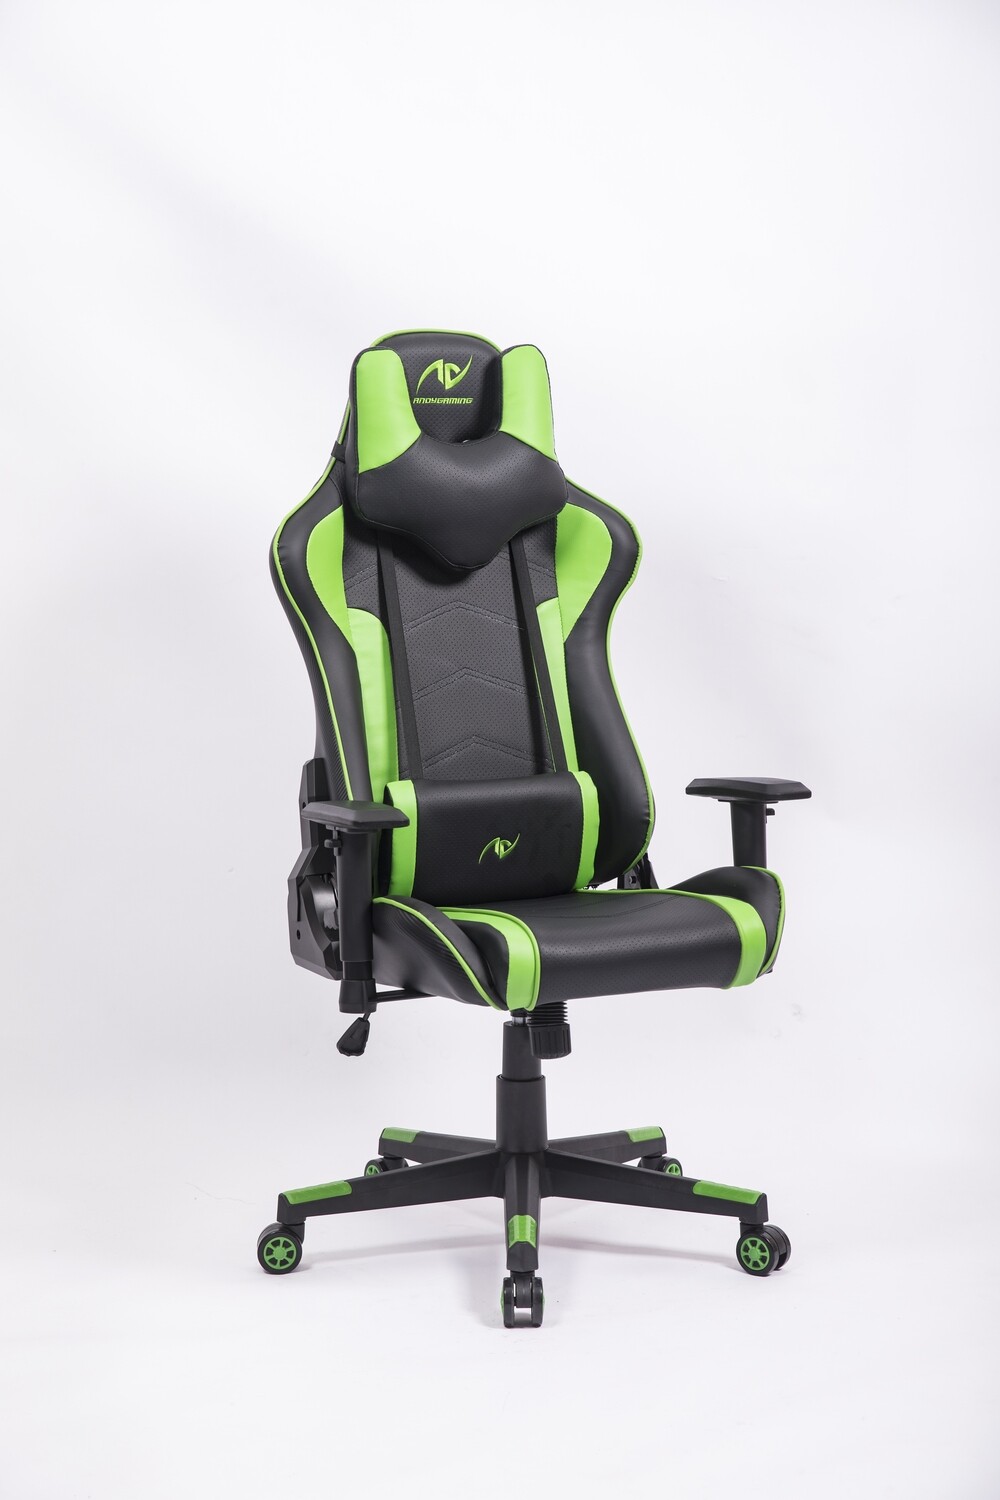 AndyGaming Green Gaming Chair